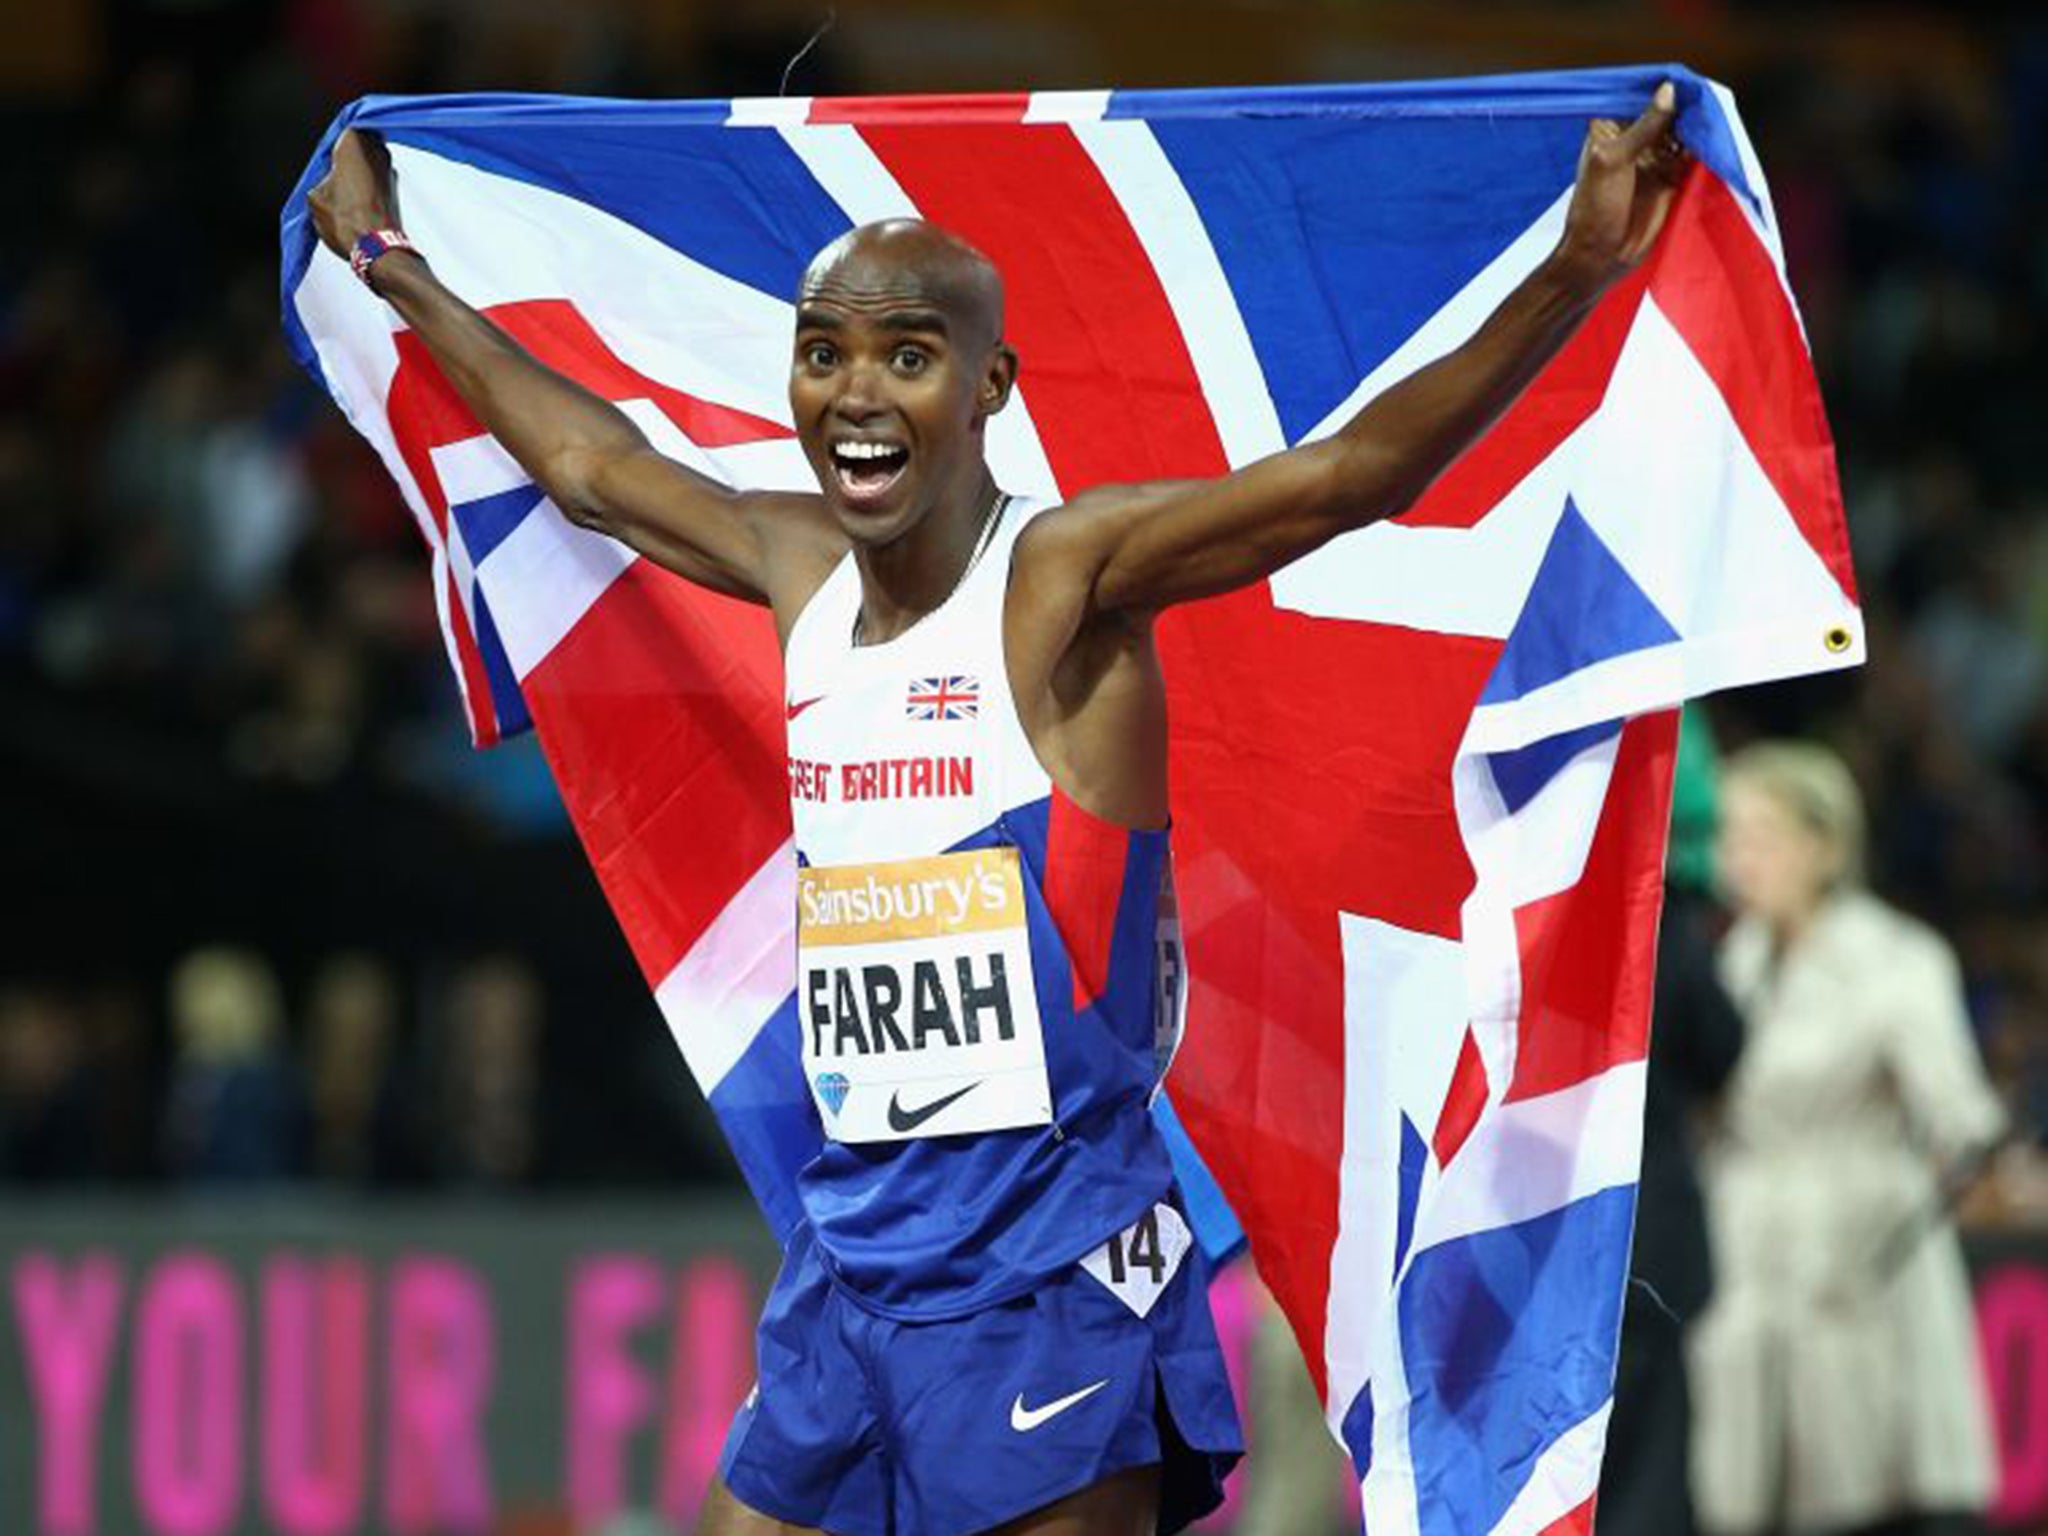 Britain’s leading athlete may have been in the headlines for the wrong reasons in past weeks but he remains the world’s leading distance runner. A repeat of that golden double over the 5,000m and 10,000m will be a hard ask but the Londoner ought to come o